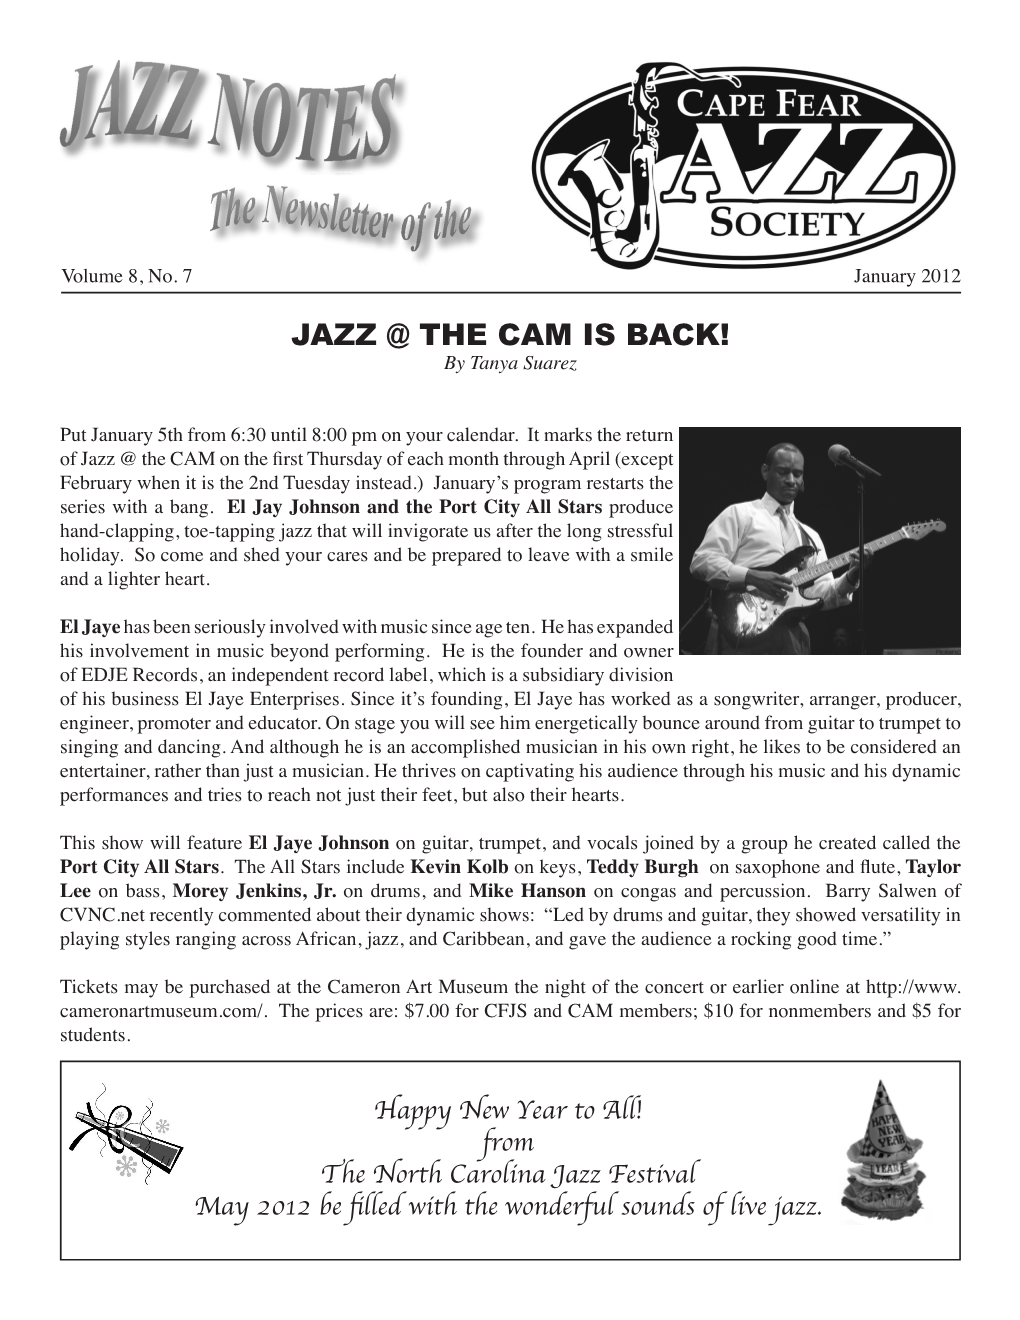 JAZZ @ the CAM IS BACK! by Tanya Suarez